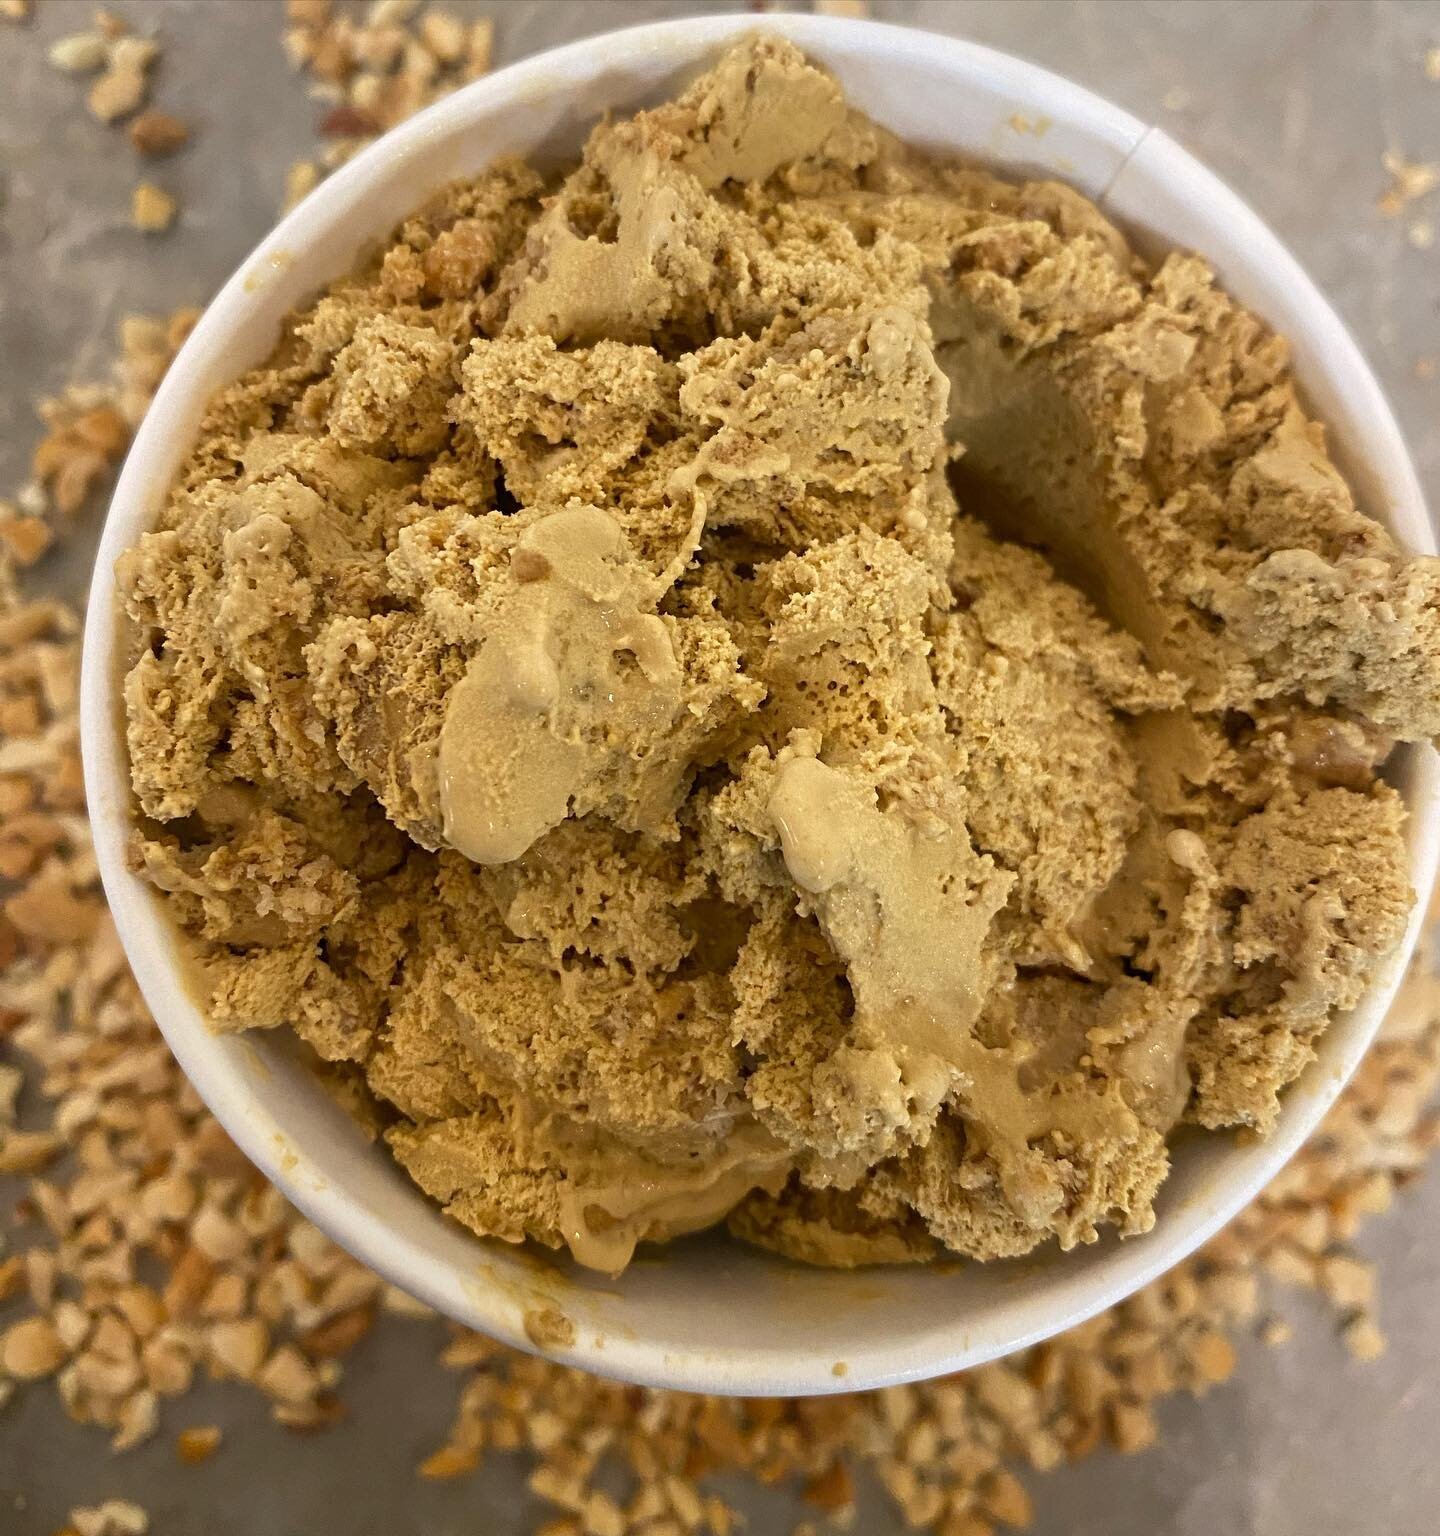 Happy Monday Abner B&rsquo;s fans! Start the week off right with our homemade ice cream. This weeks feature flavor is creamy crunchy peanut butter! It is is jam packed with nutter butter cookies. Order it in a cup, cone, or a to go pint! Find your be